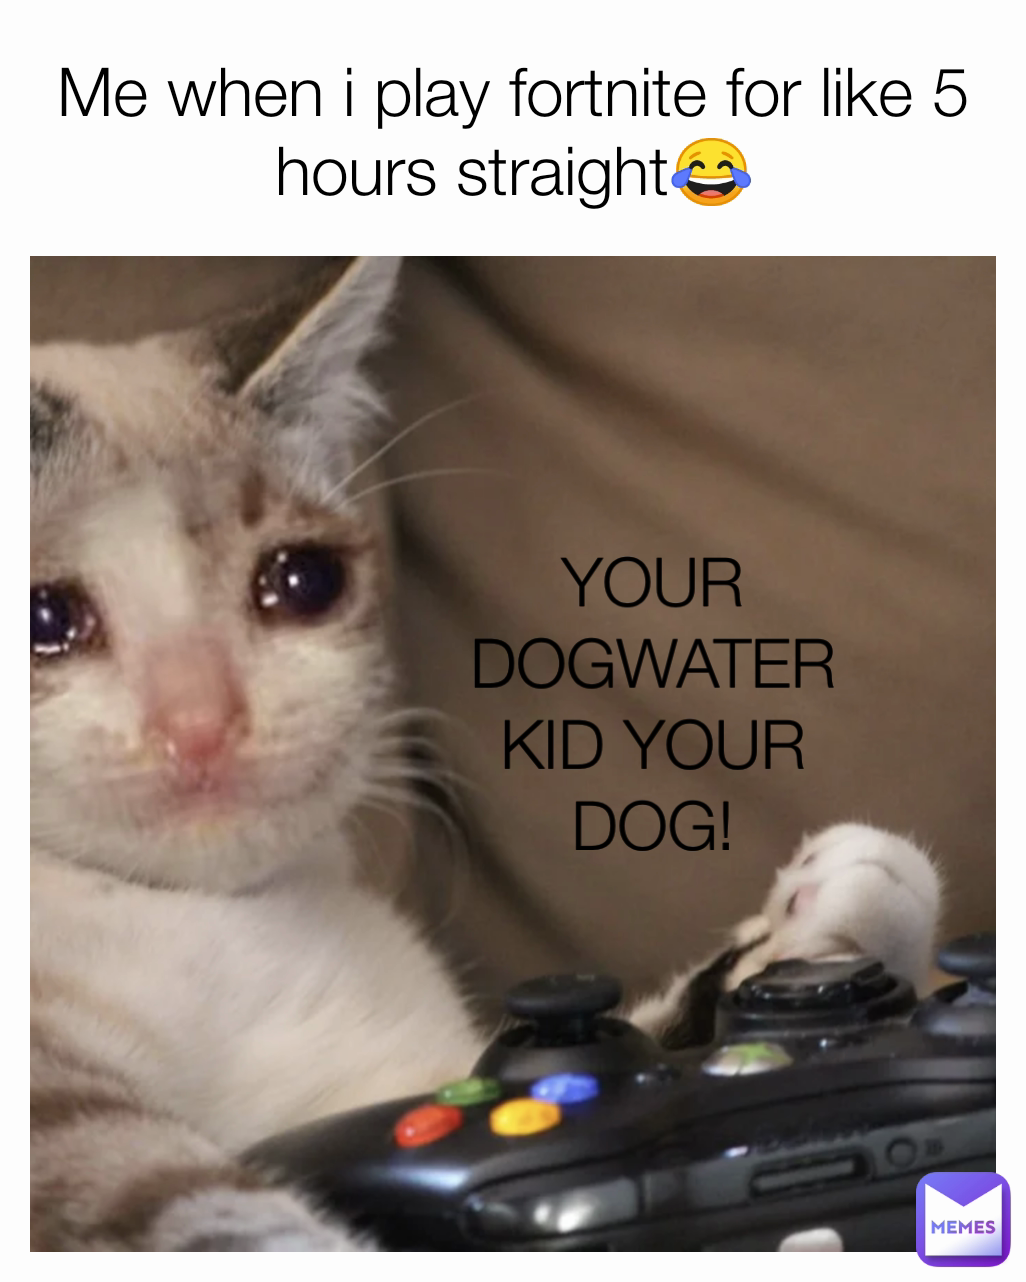 Me when i play fortnite for like 5 hours straight😂 YOUR DOGWATER KID YOUR DOG!